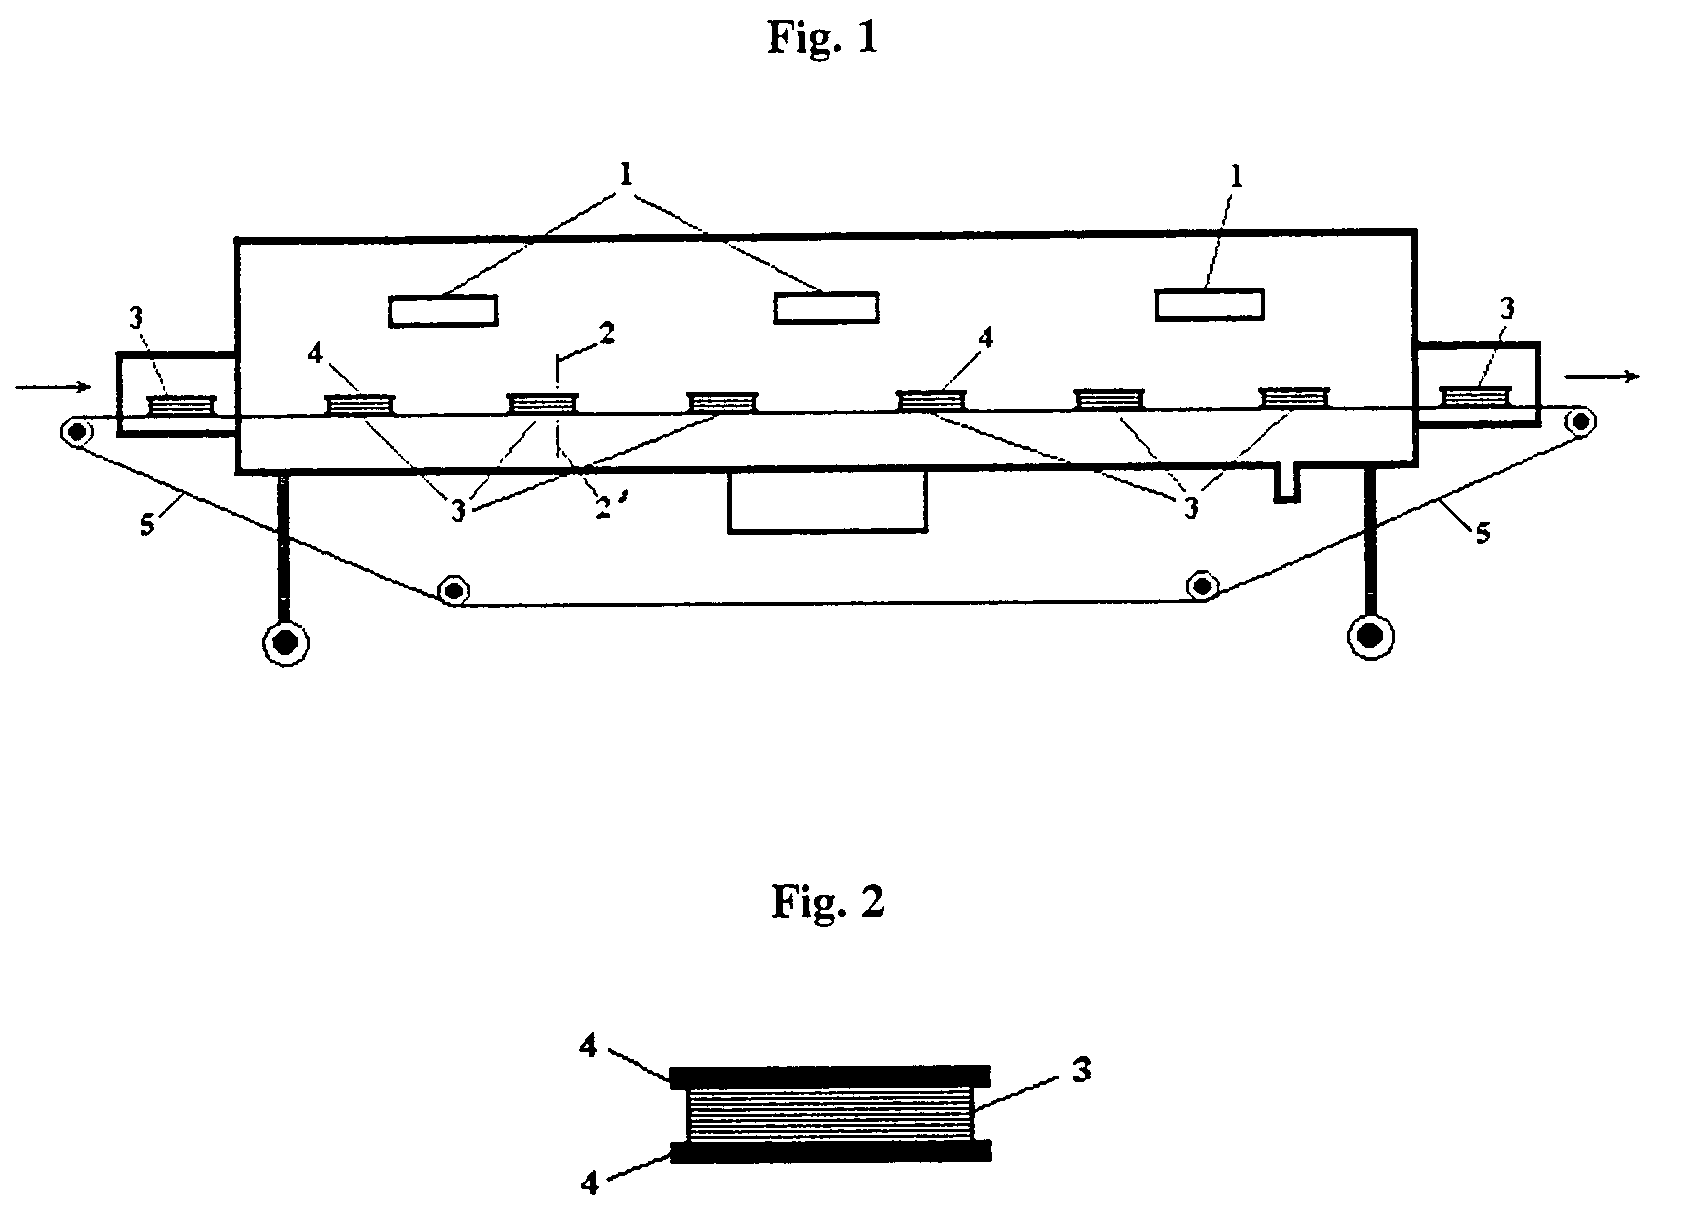 Method of drying book and similar paper-based materials